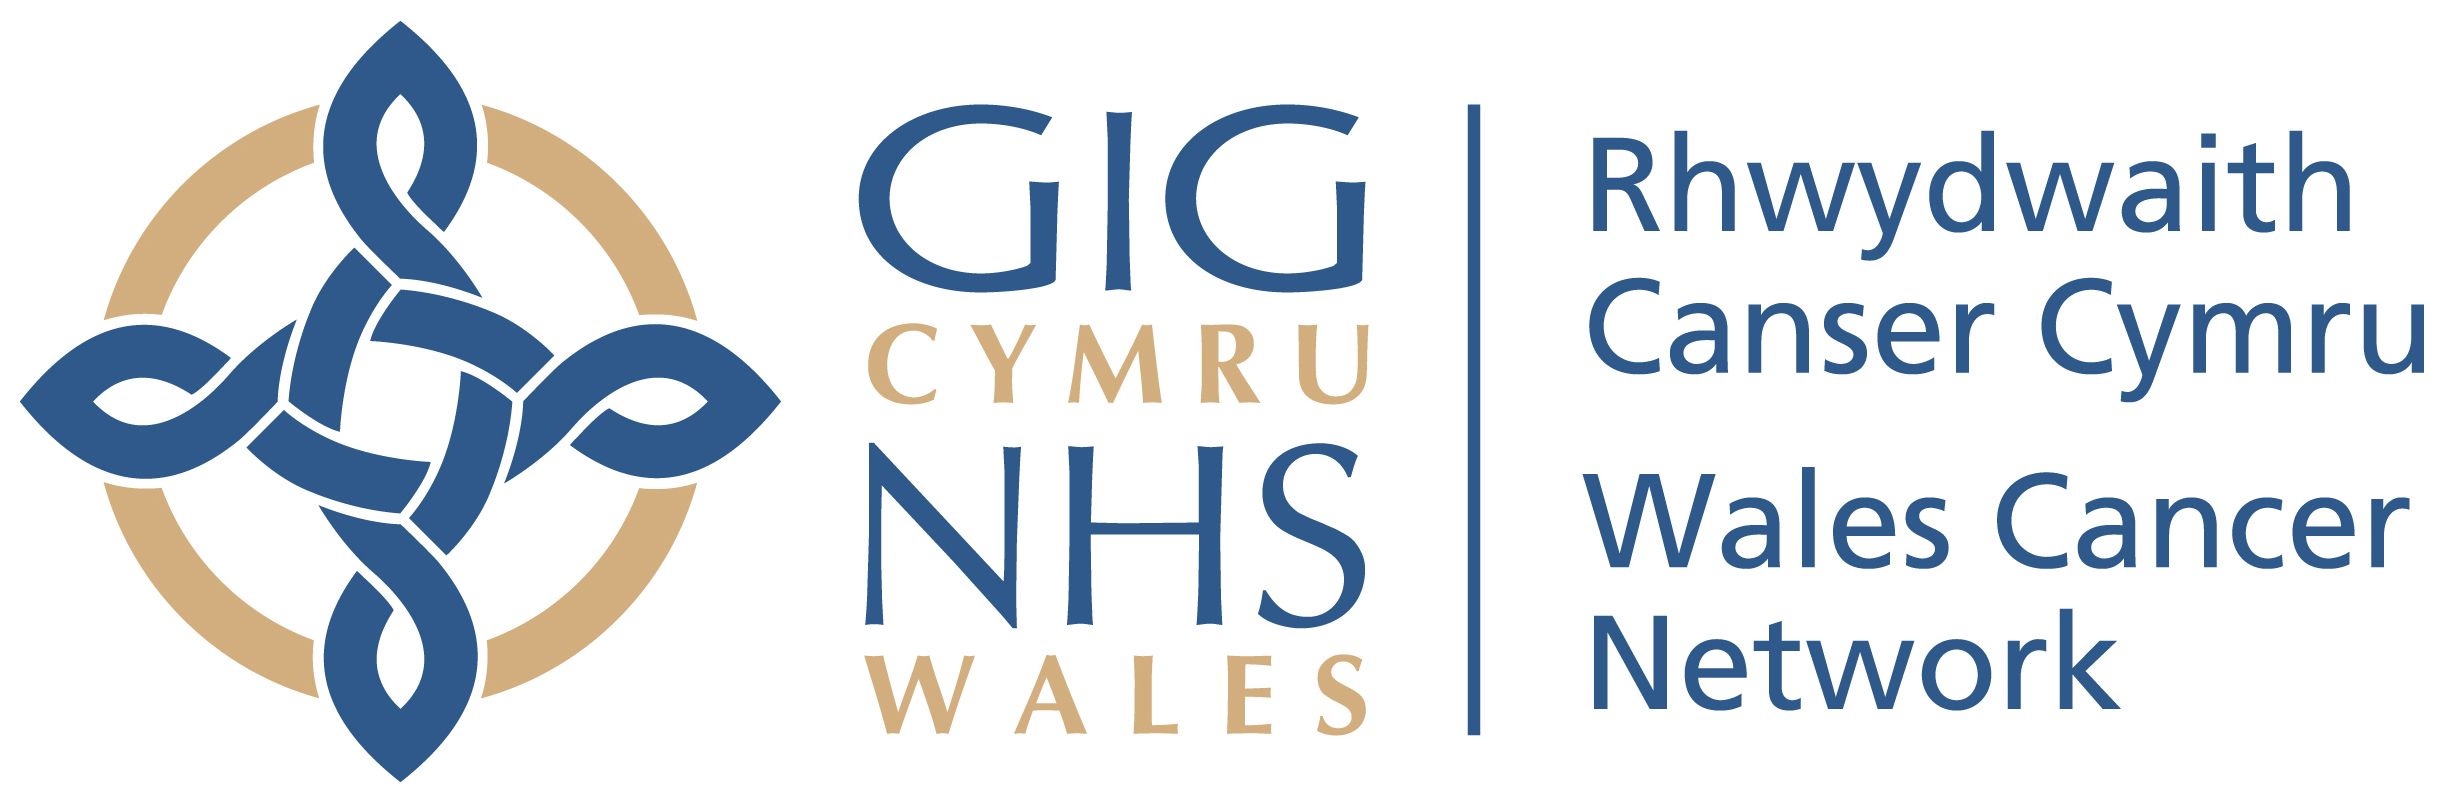 Wales Cancer Network